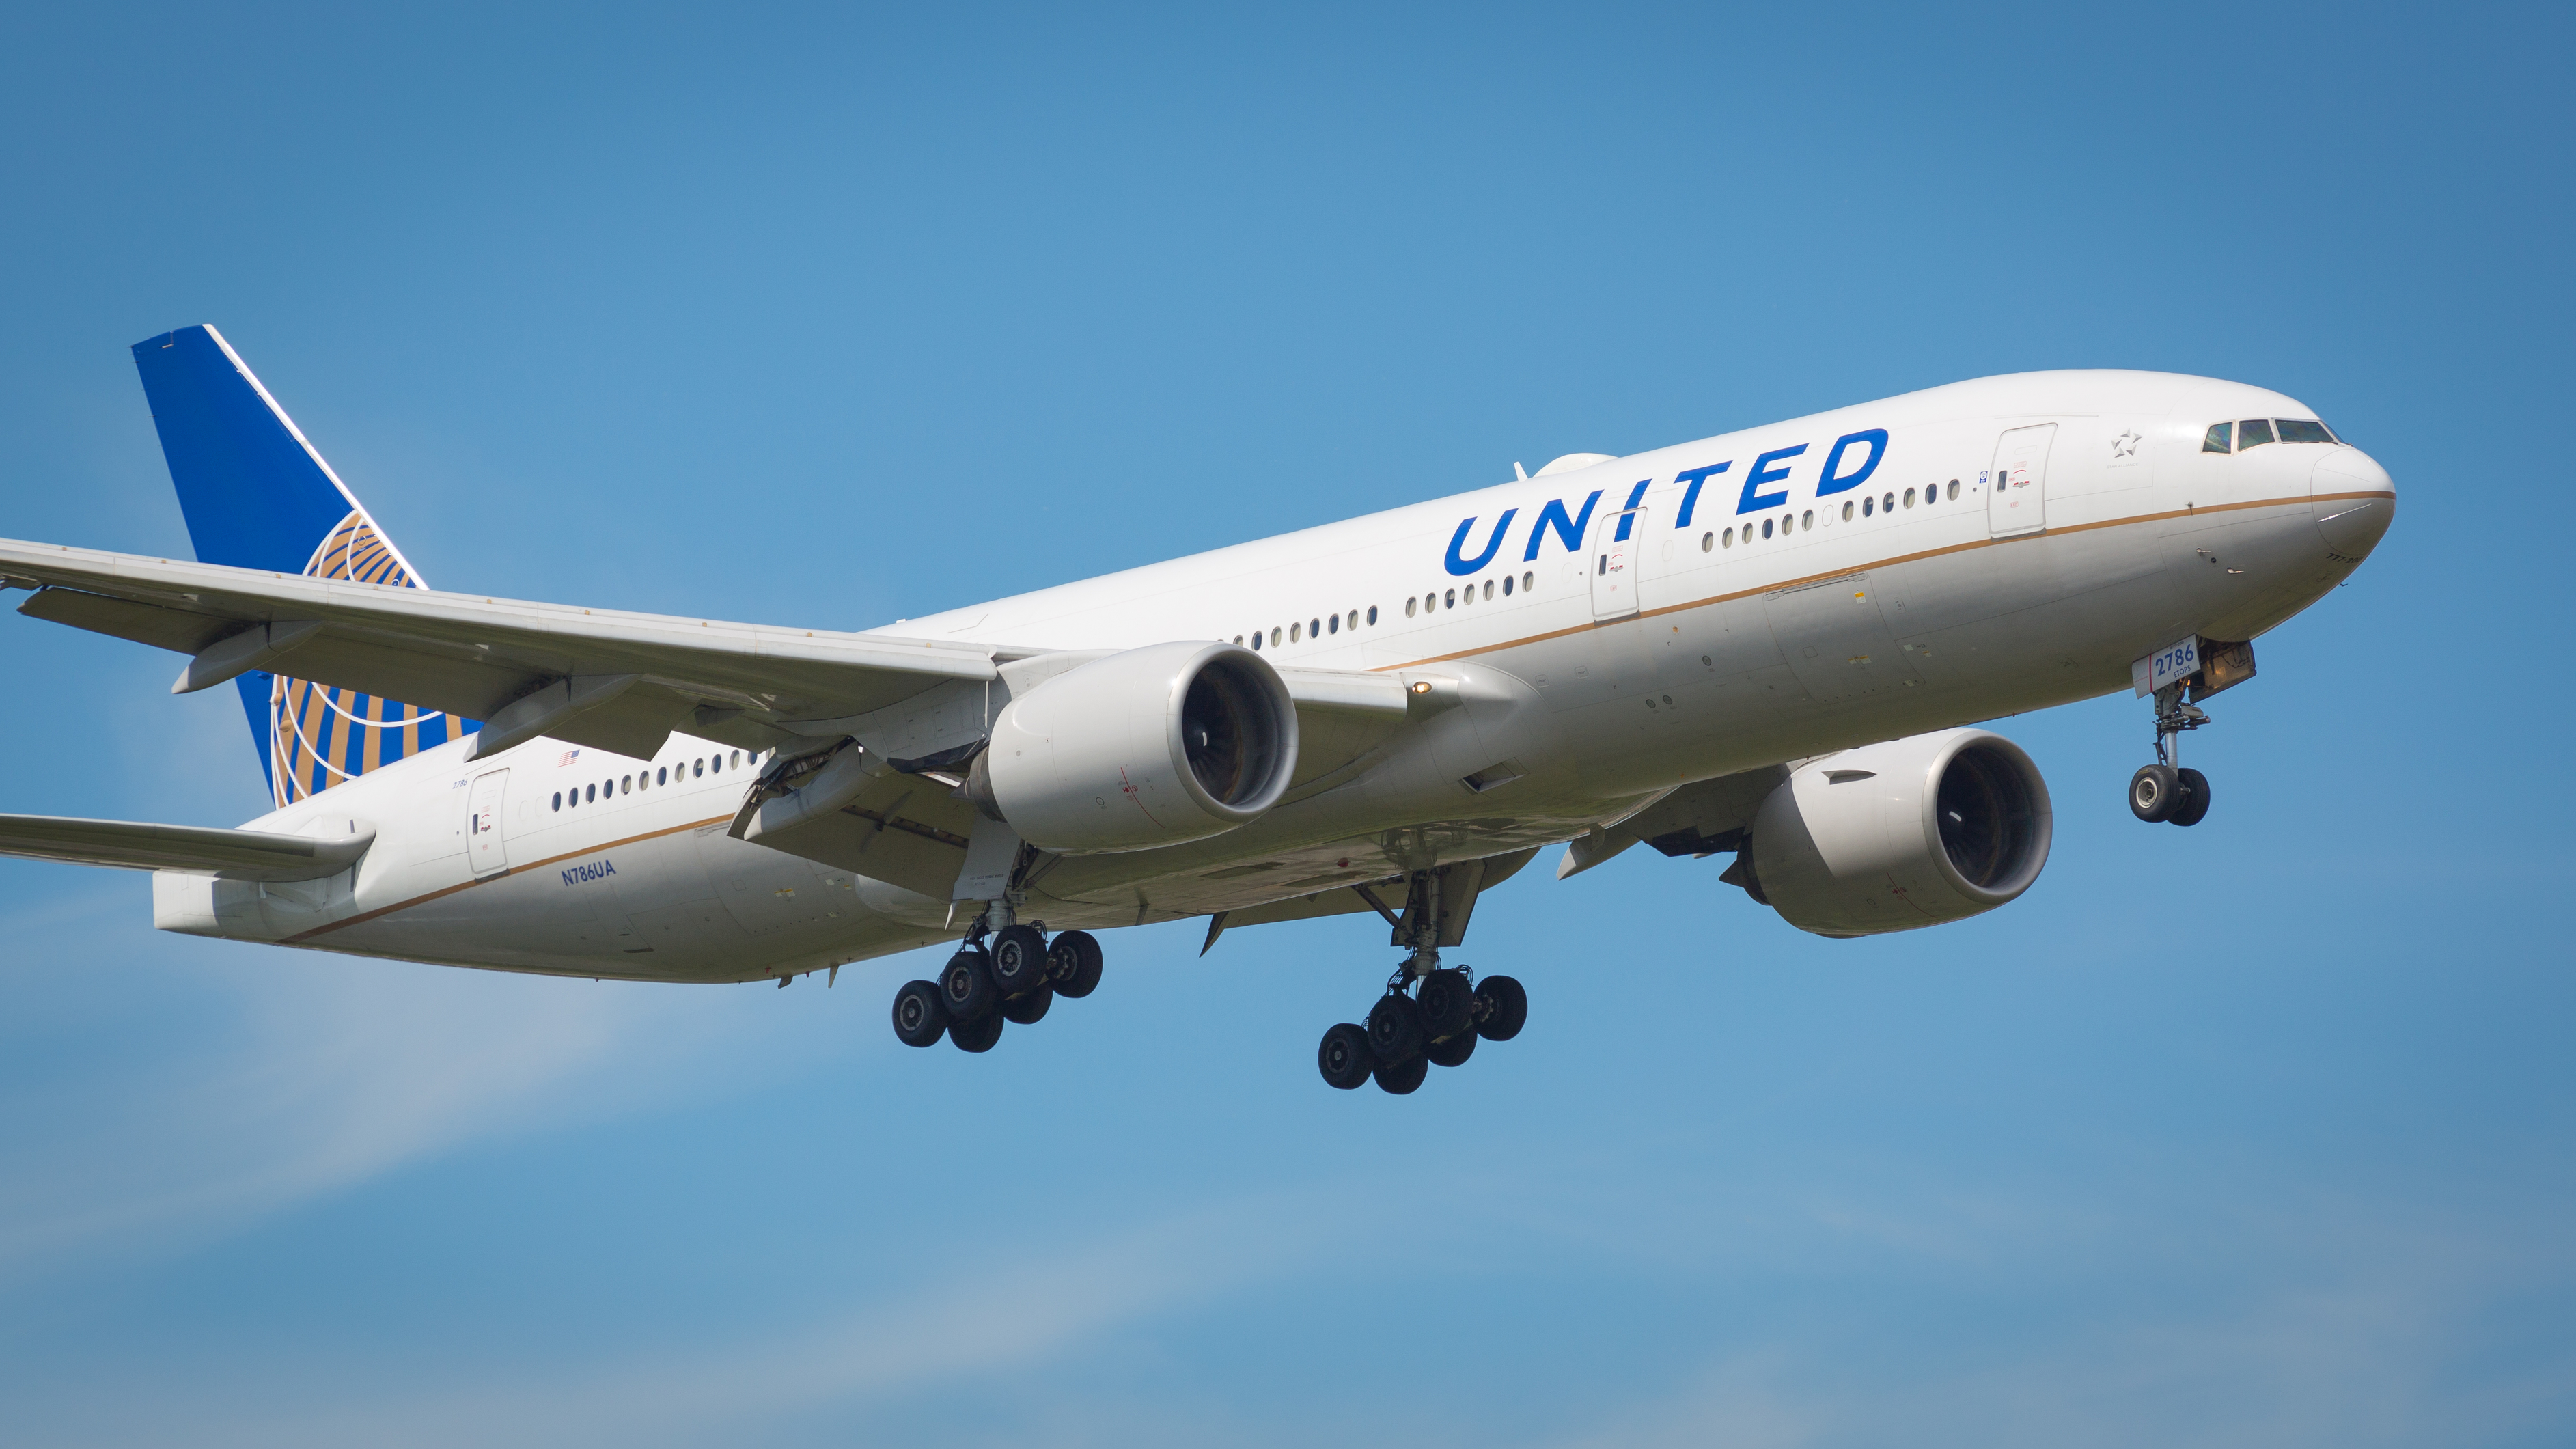 United Airlines sale Flights to Alaska from 189 Clark Deals